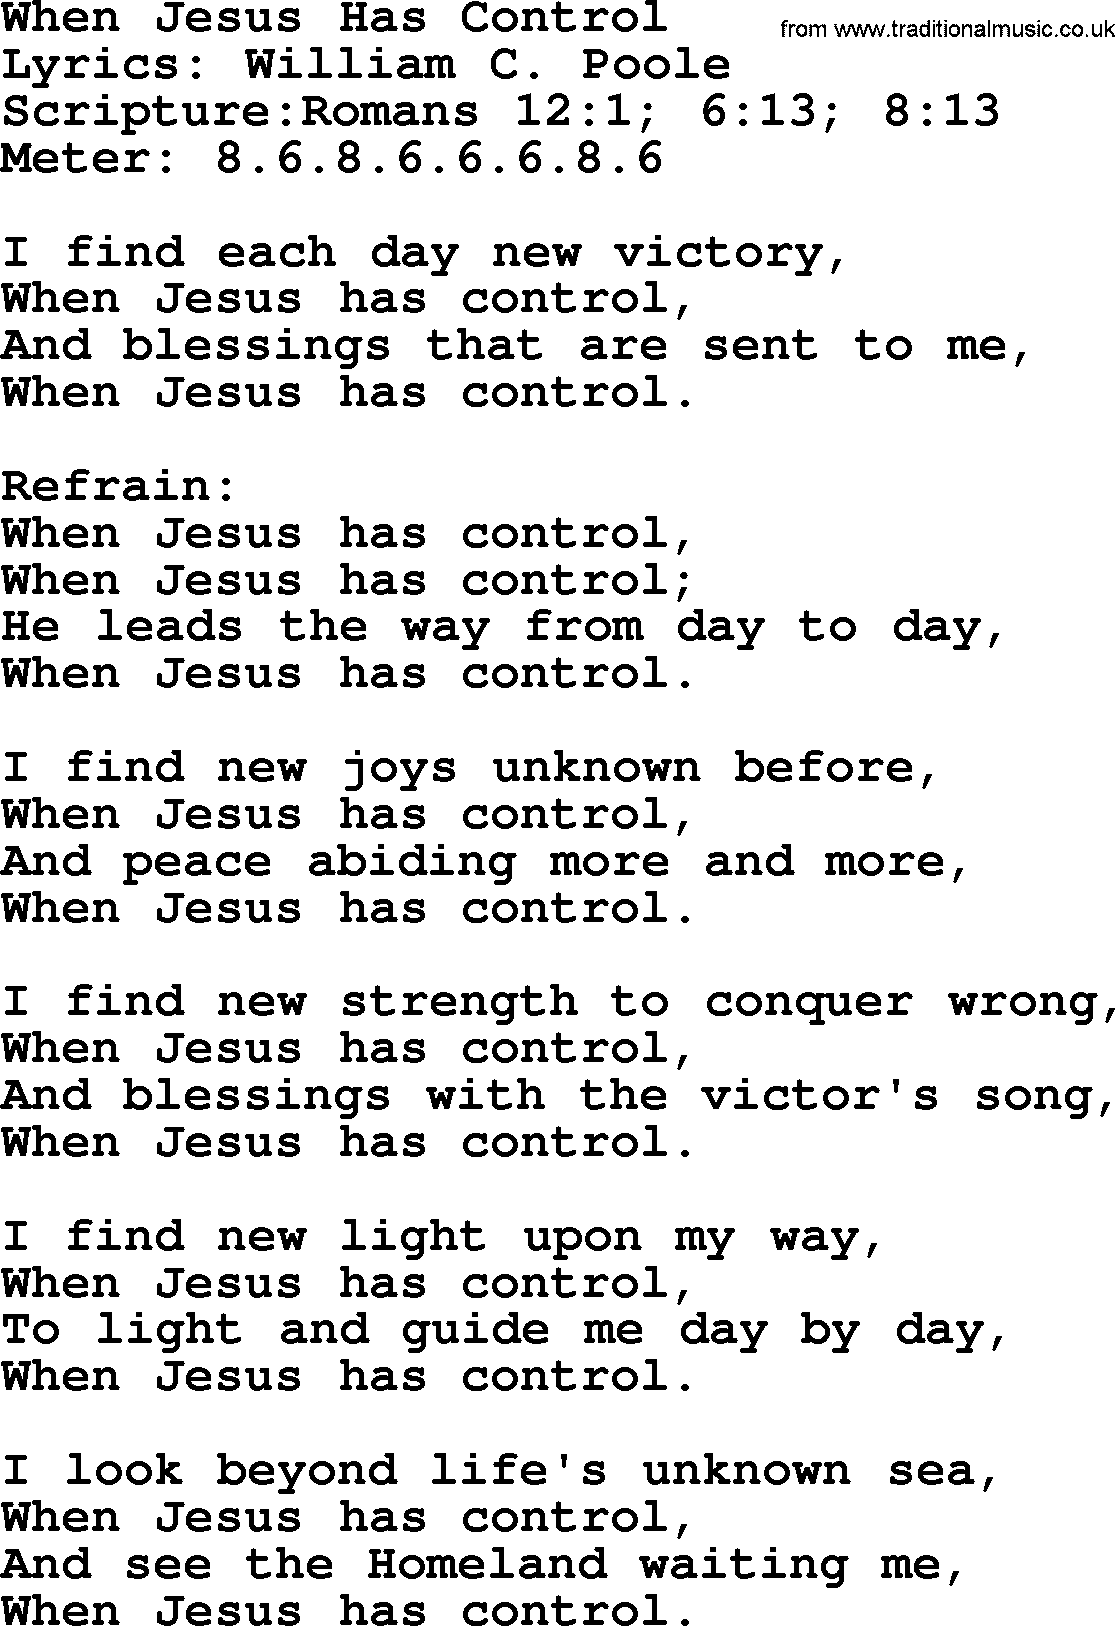 Hymns about  Angels, Hymn: When Jesus Has Control, lyrics, sheet music, midi & Mp3 music with PDF